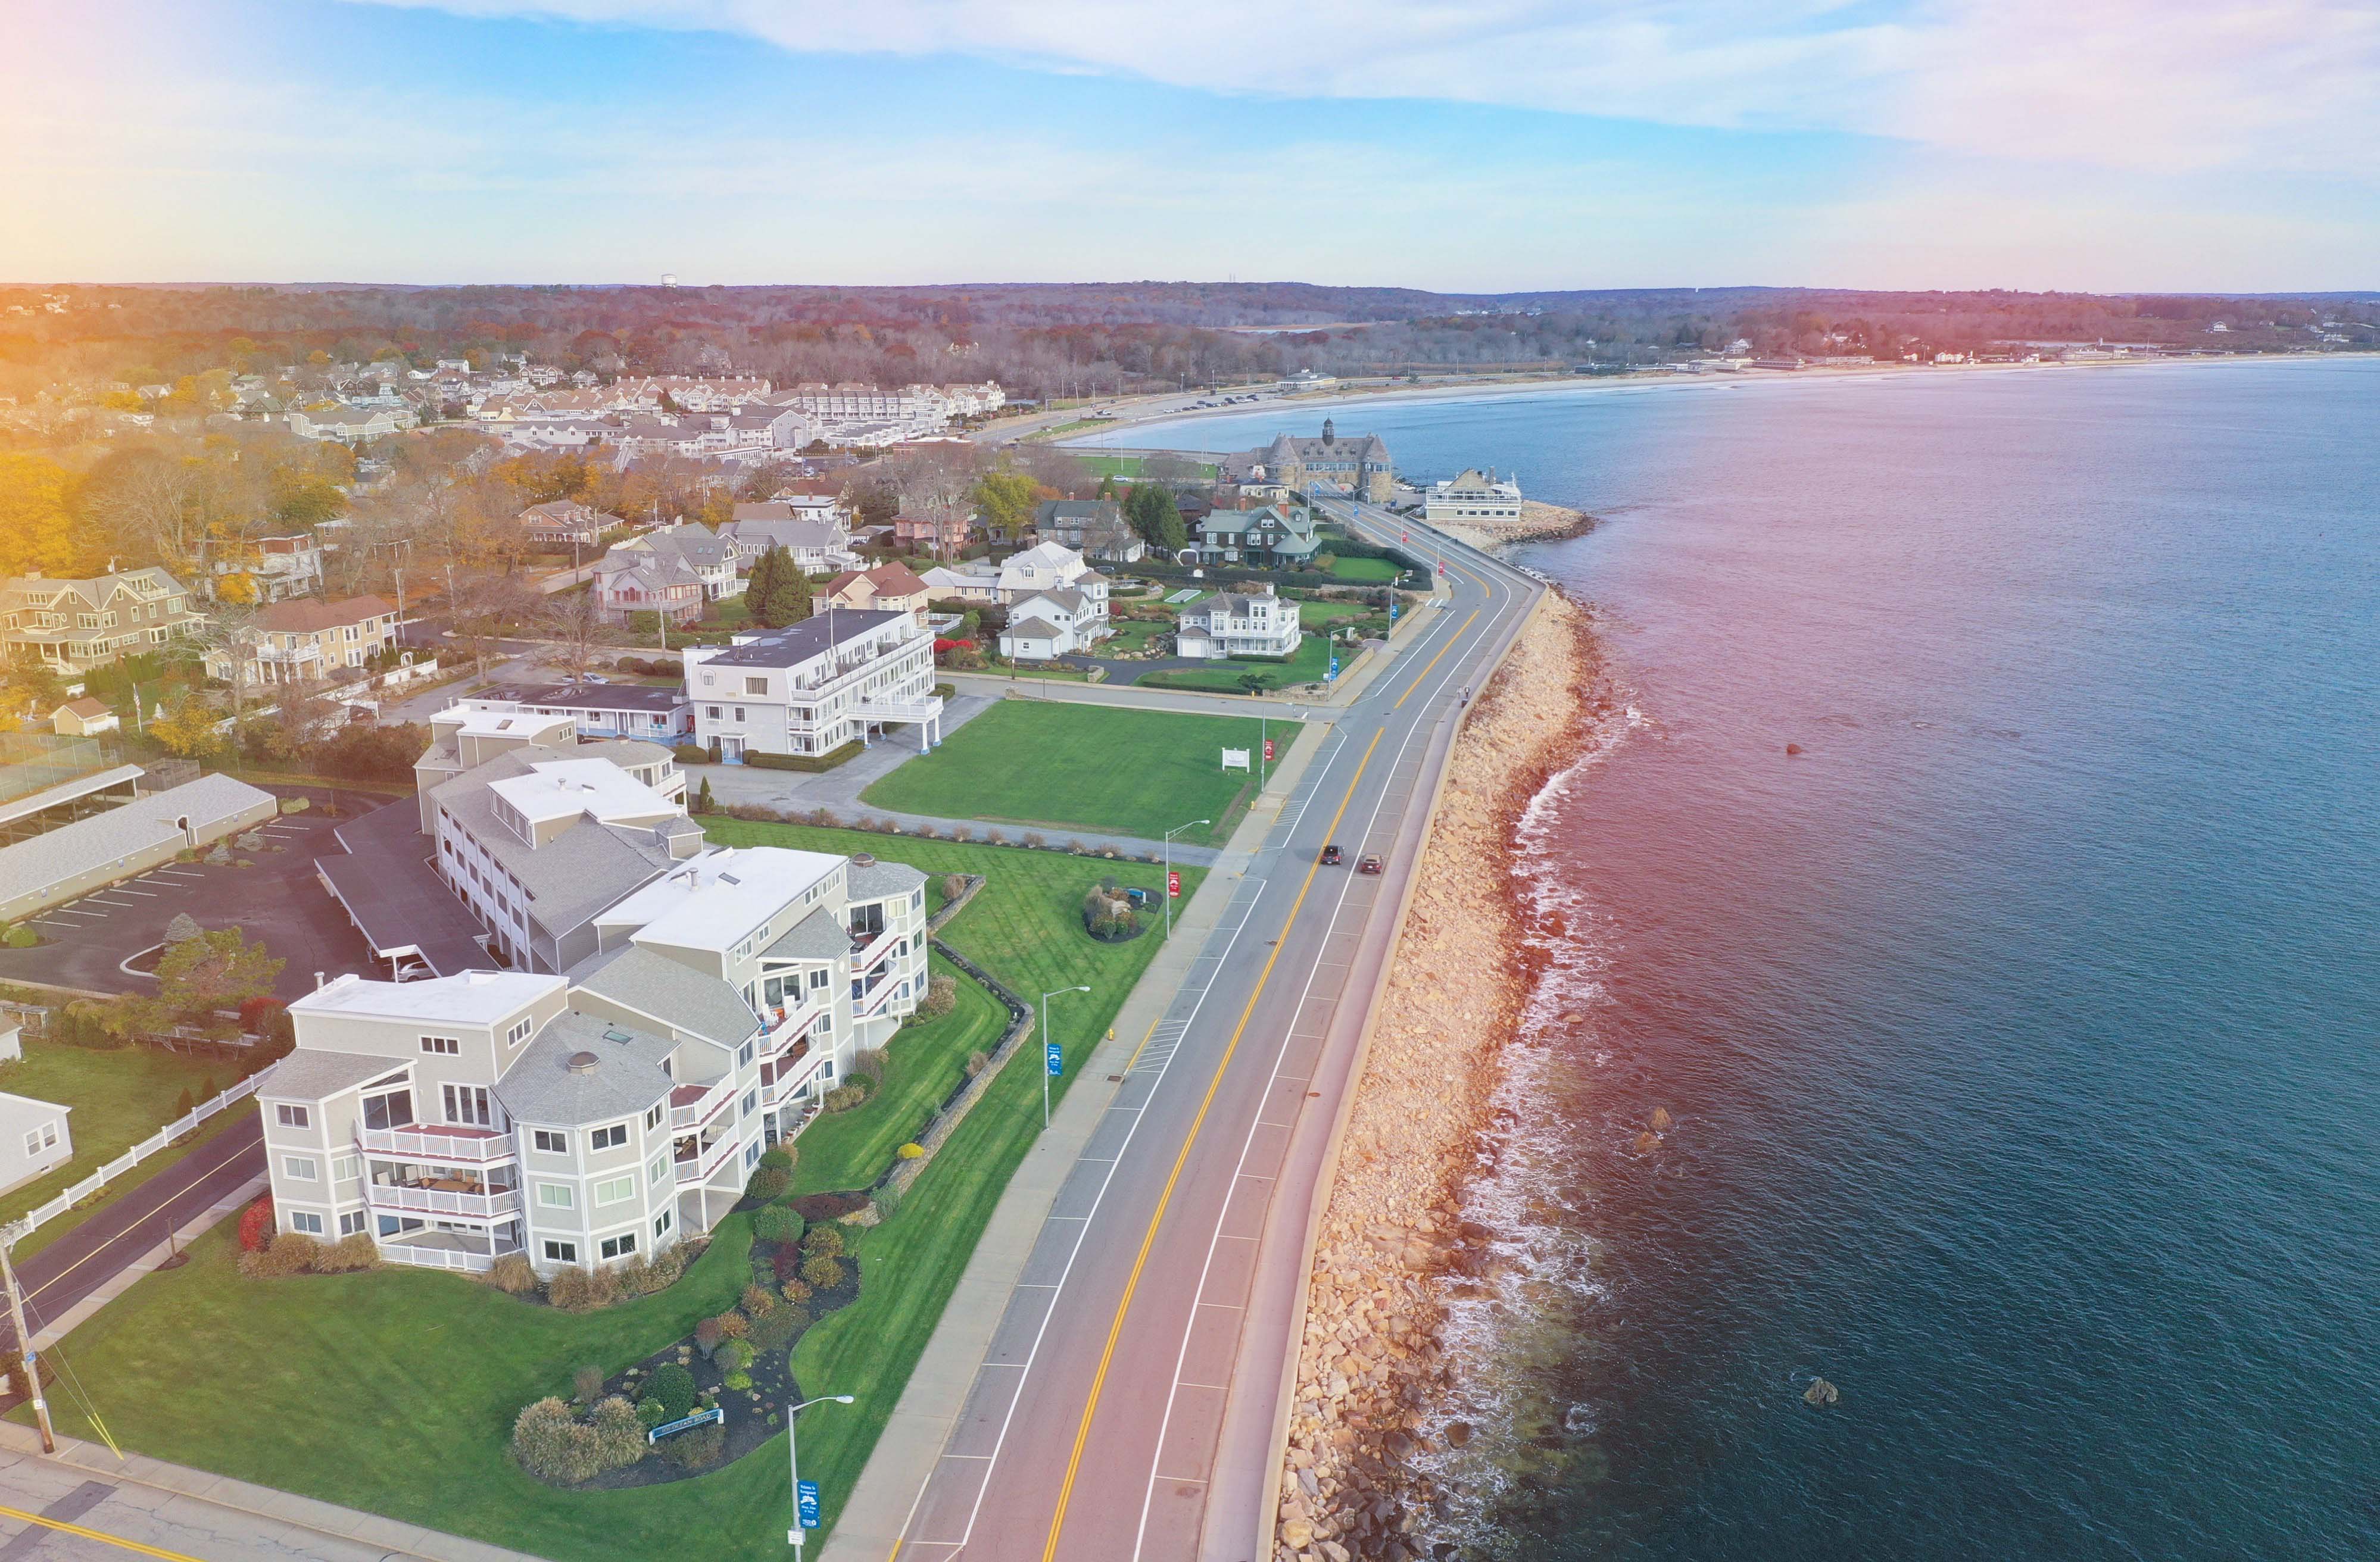 OCEANFRONT CONDO SALE IN NARRAGANSETT MARKS THE HIGHEST CONDO SALE IN TOWN SINCE 2017, WITH LILA DELMAN ON BOTH ENDS OF THE TRANSACTION*